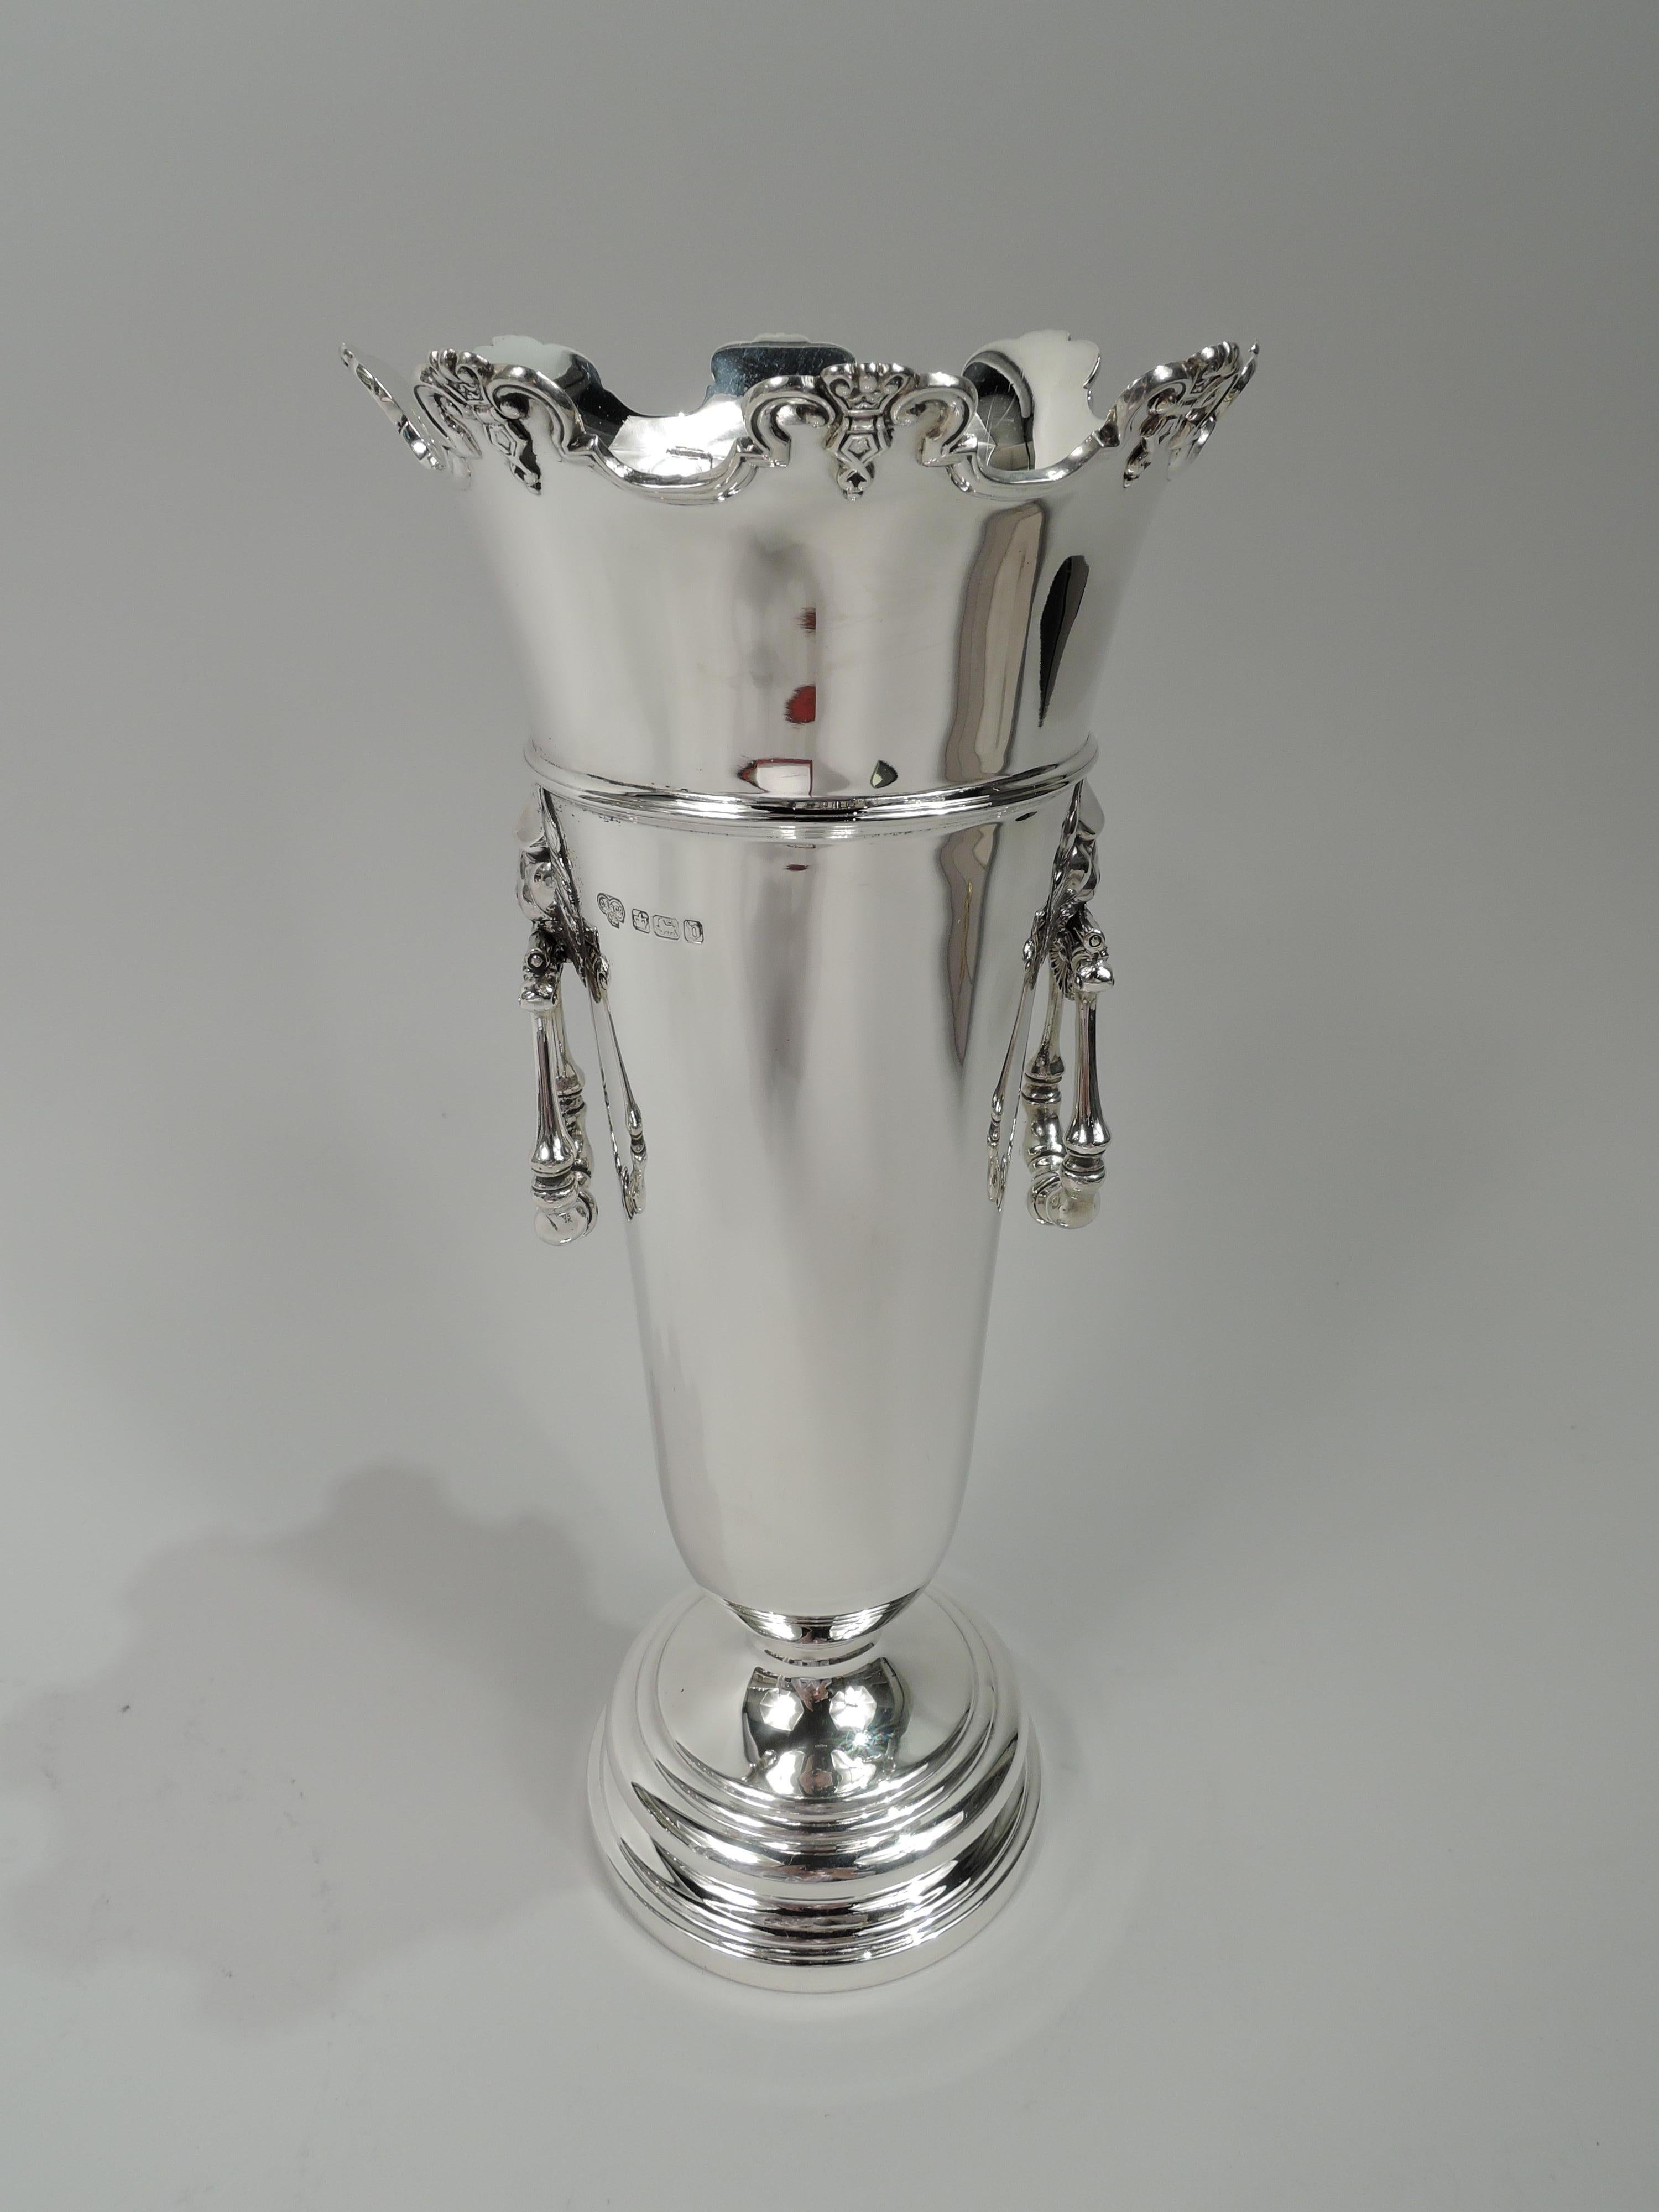 George V sterling silver vase. Made by Goldsmiths & Silversmiths Co. Ltd in Sheffield in 1913. Tapering and girdled tube on stepped foot. Flared and castellated rim with applied molding and ornament. Lion’s head side mounts with hinged and turned